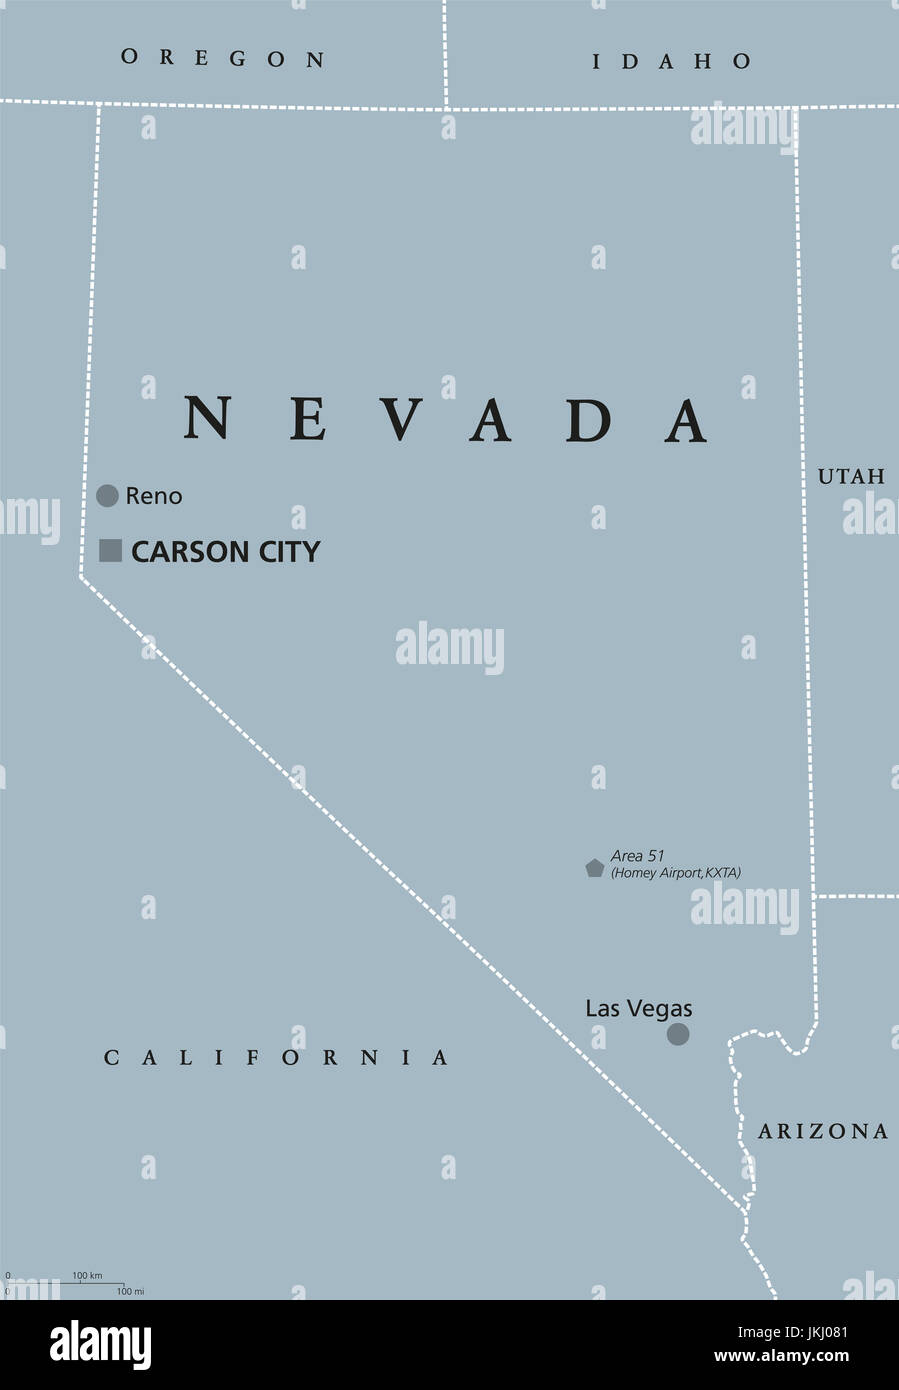 Nevada political map with Las Vegas, Reno and capital Carson City. State in the Western, Mountain West, and Southwestern regions of the United States. Stock Photo